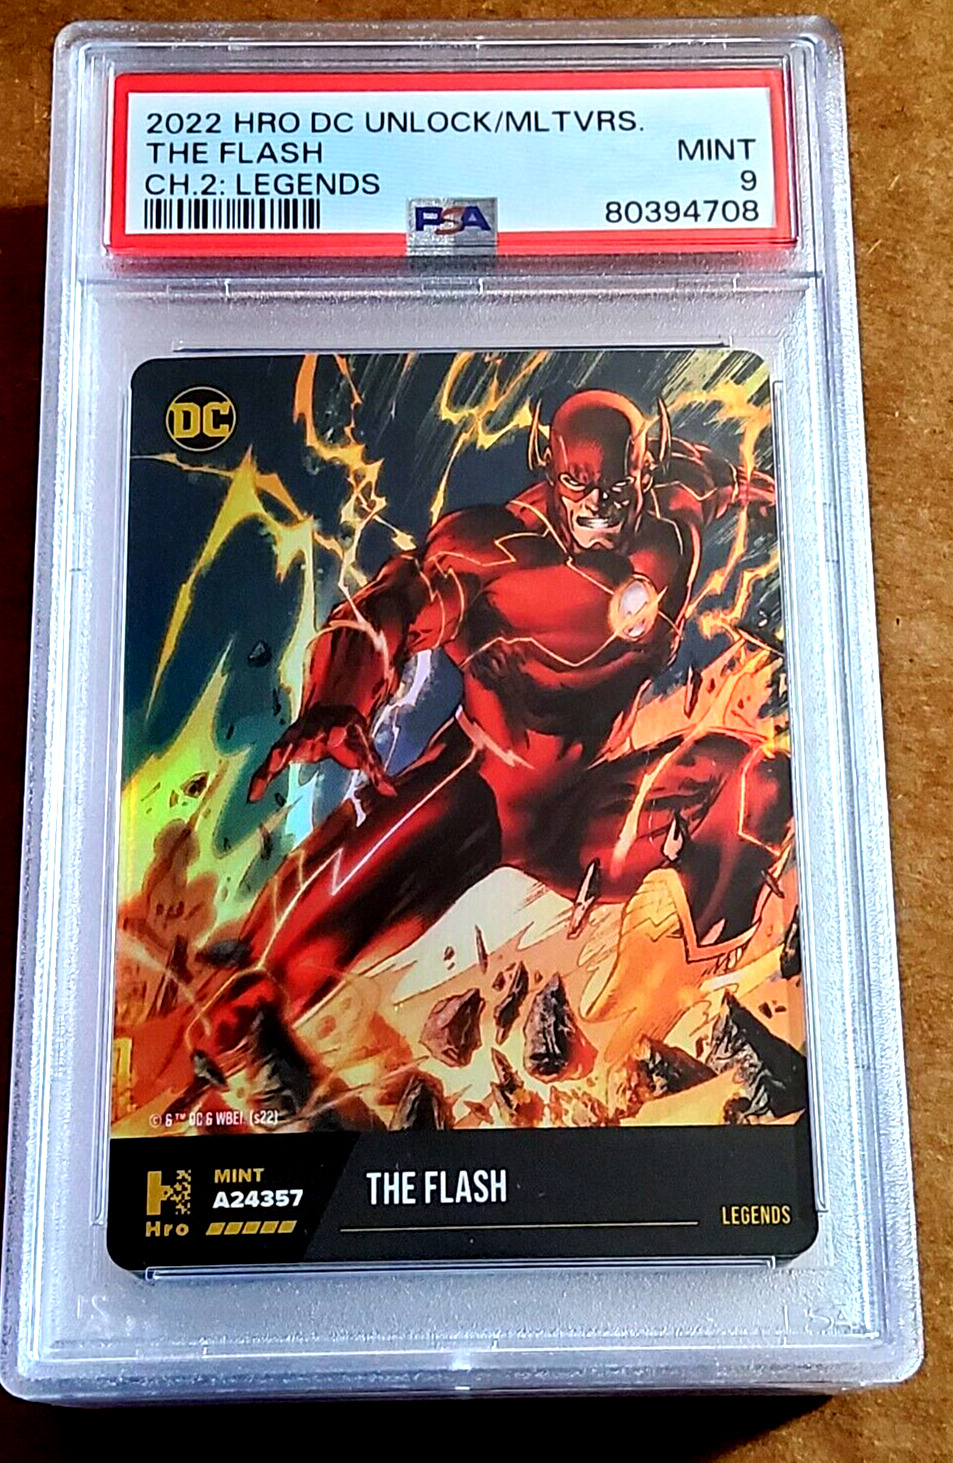 2022 HRO Chapter 2 THE FLASH Legends Holo Physical (Card Only) PSA 9 Mint